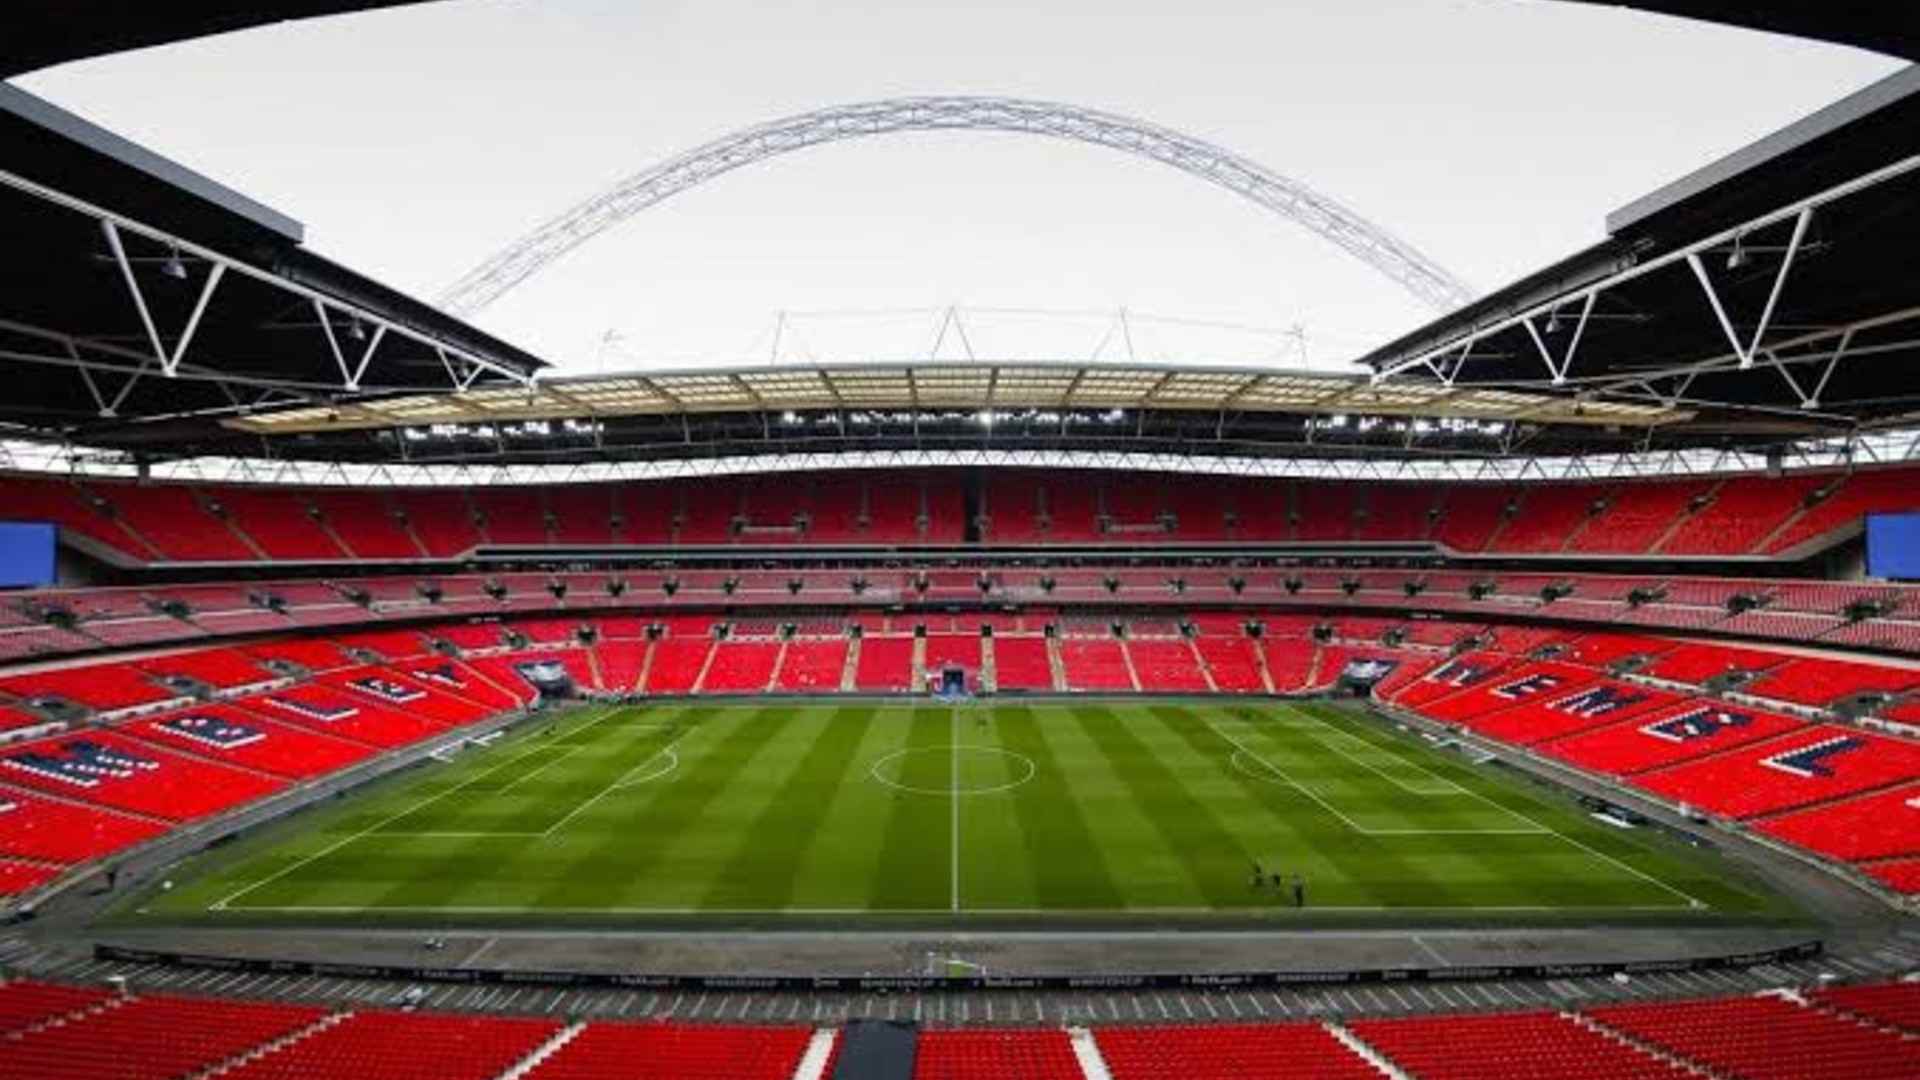 Wembley Stadium to have 60,000 fans for Euro 2020 semis and finals